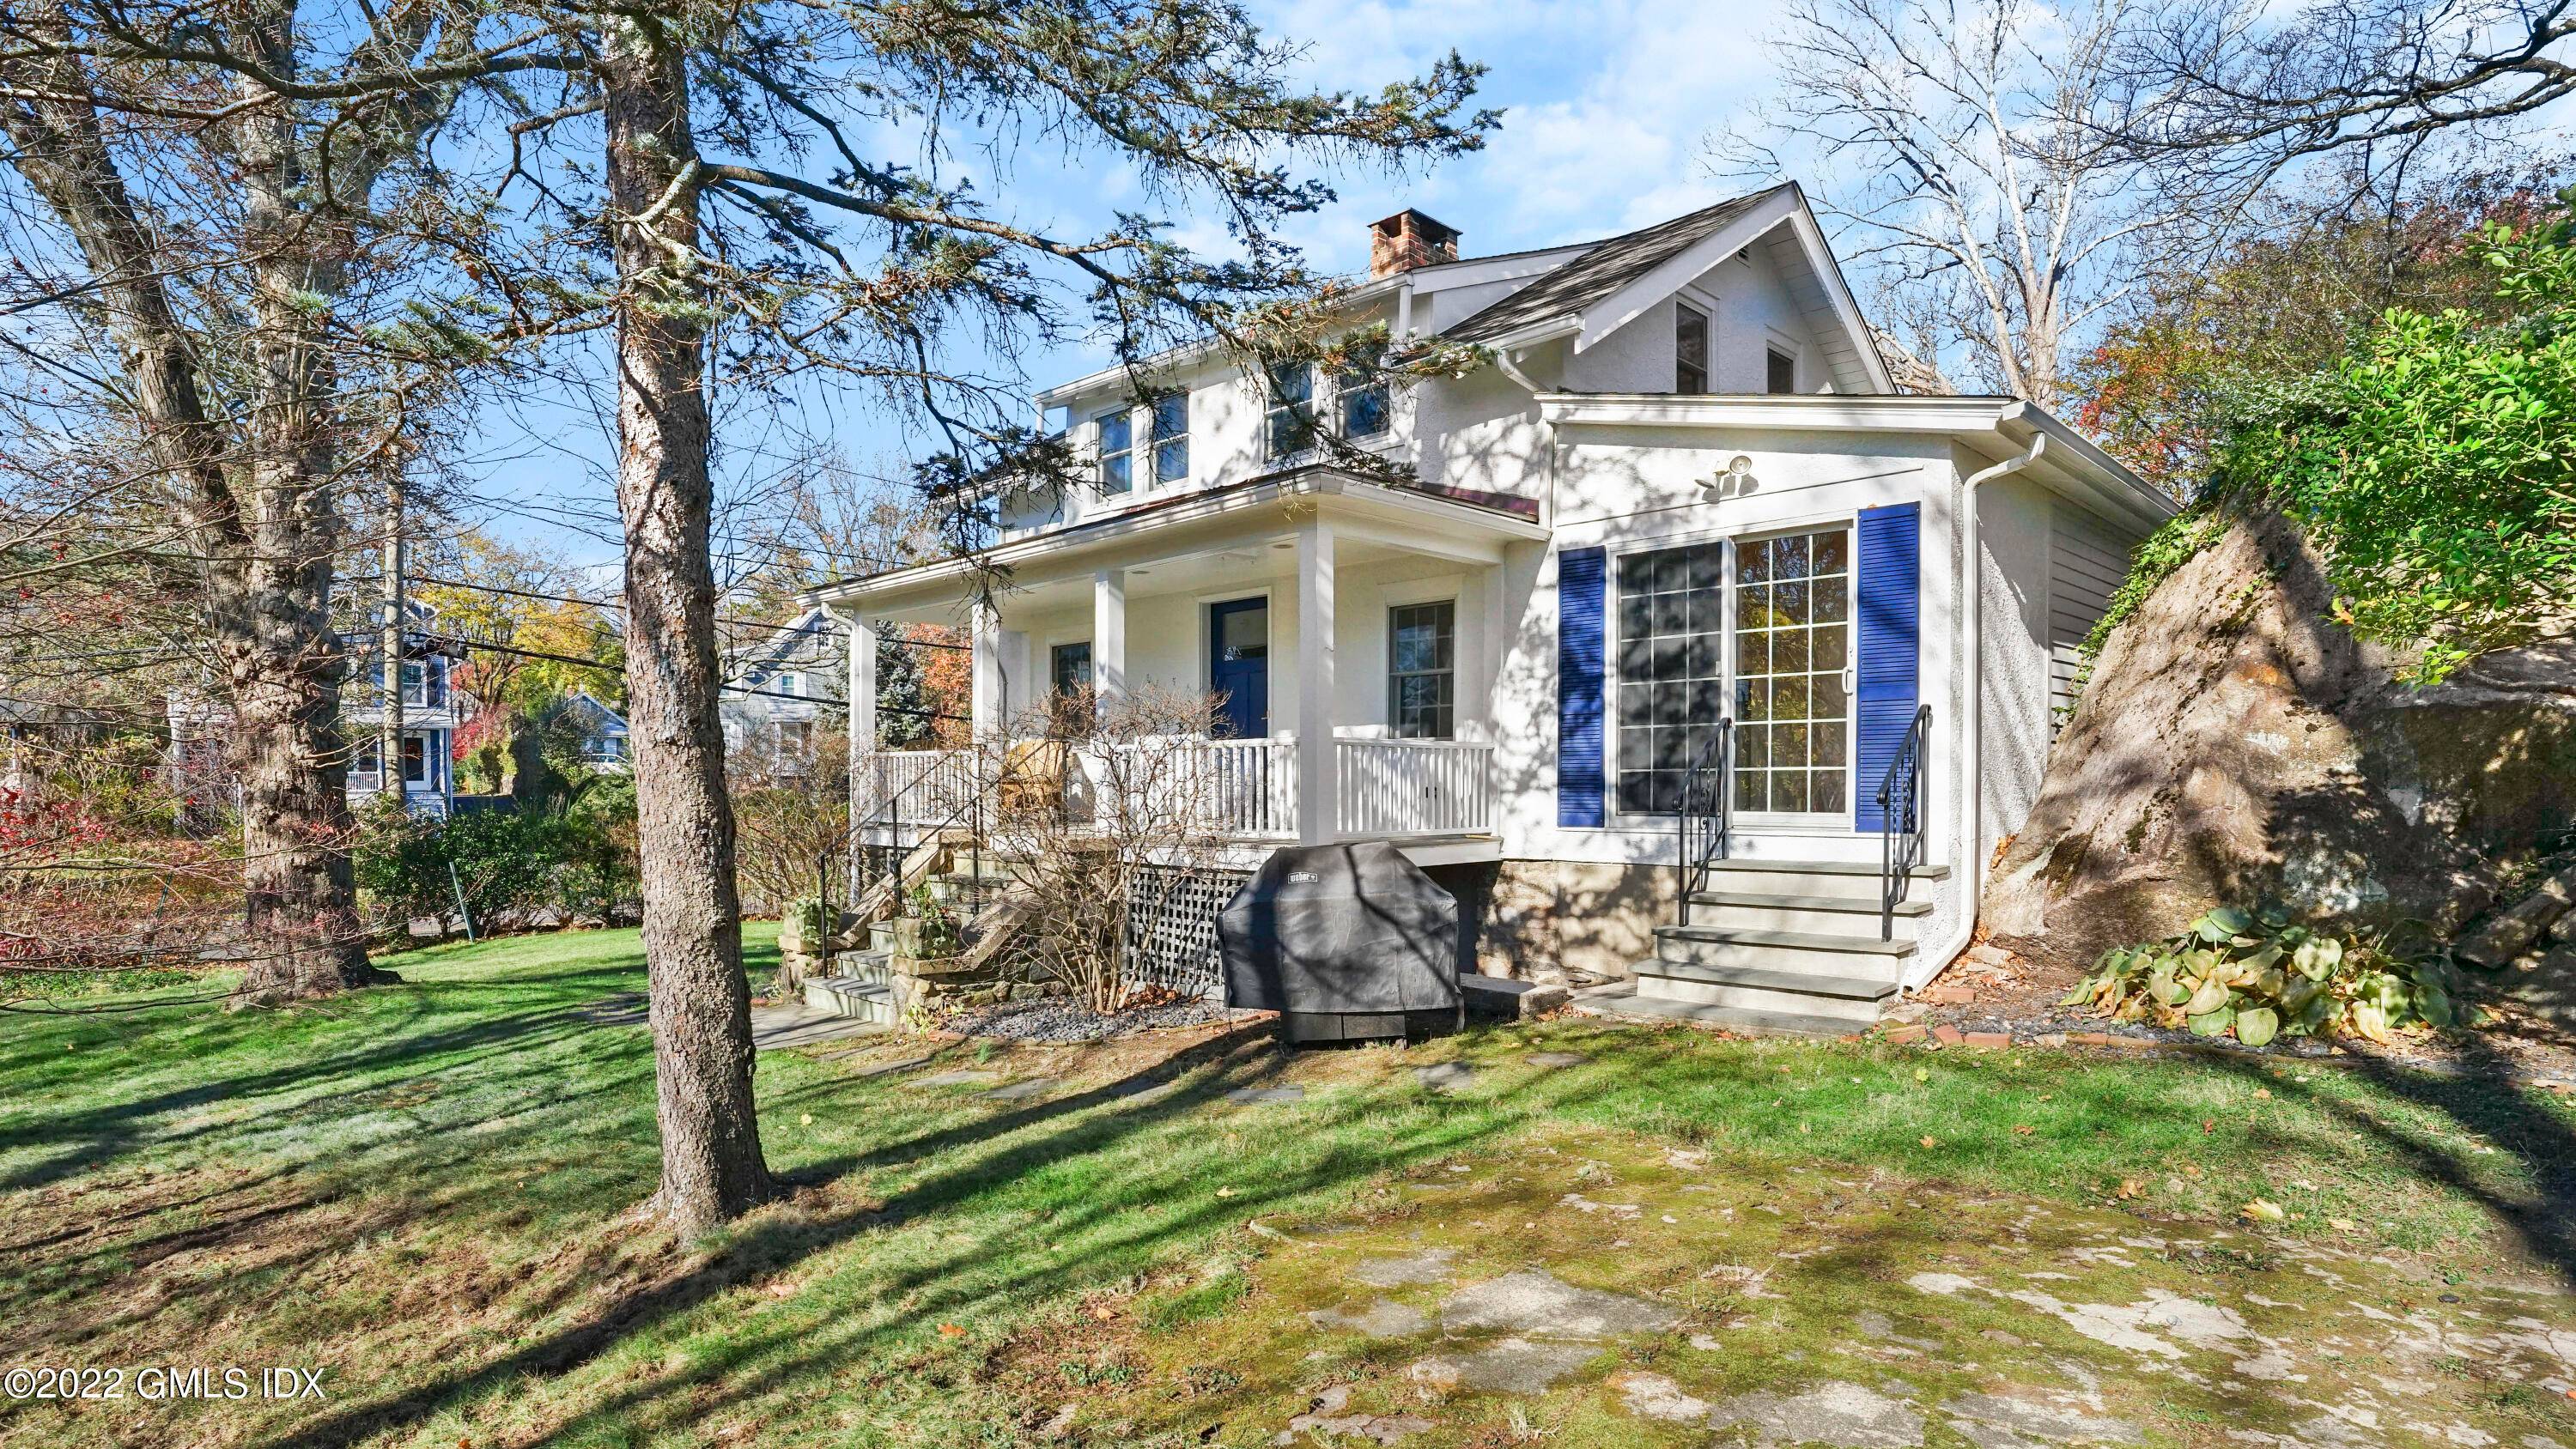 Charming cottage with an inviting front porch in the heart of Cos Cob.